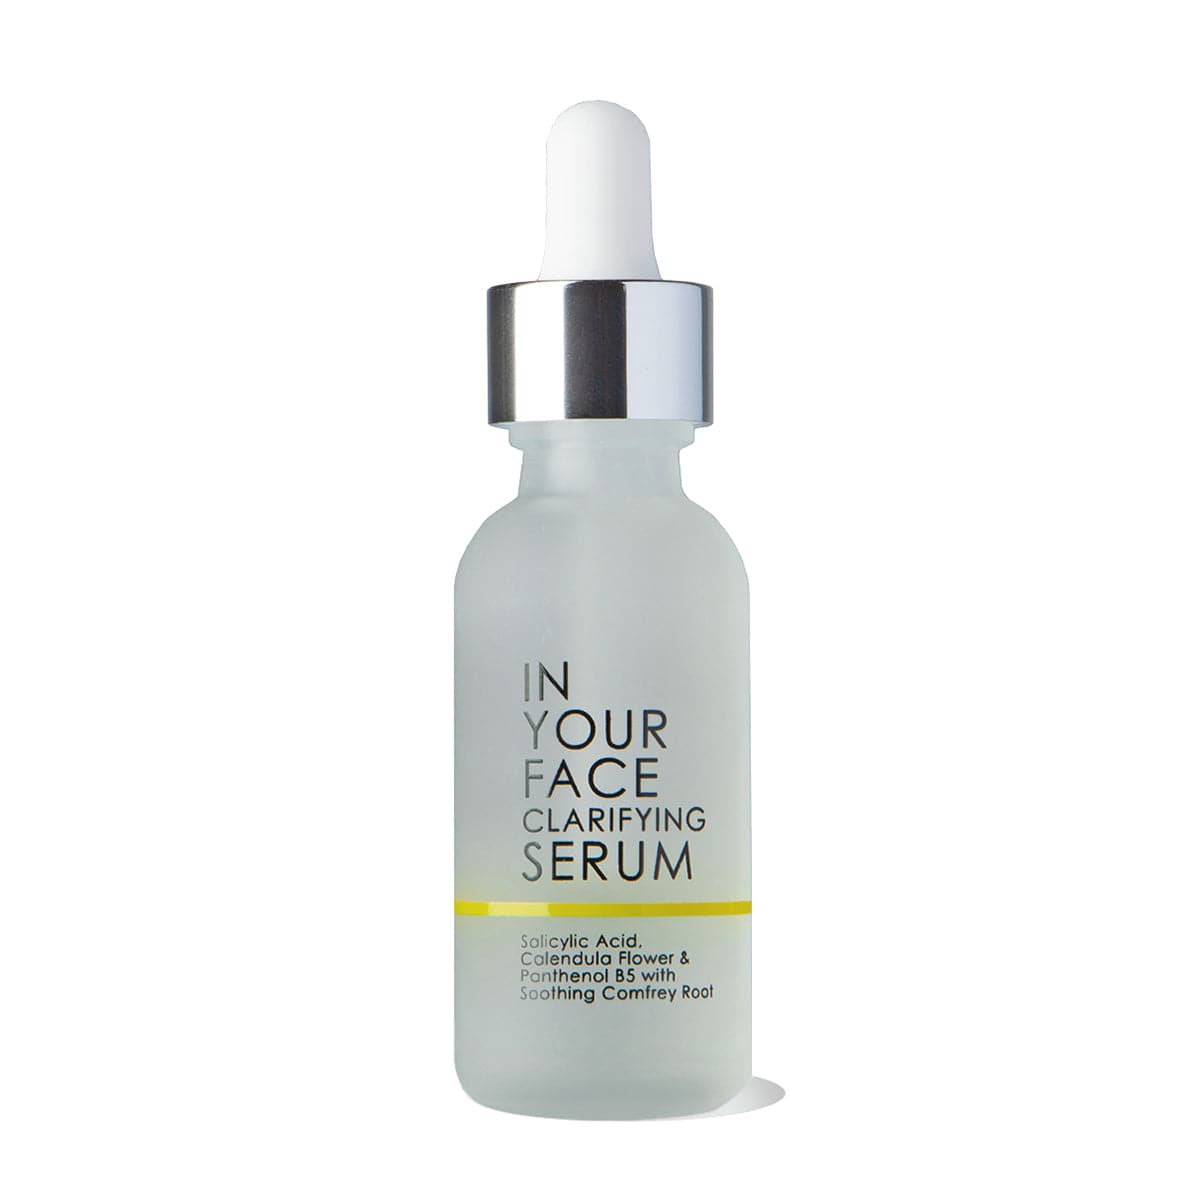 a bottle of the IN YOUR FACE CLARIFYING SERUM on a white background with a small shadow underneath the bottle. It shows a pipette that you can squeeze as the dispenser for the product on top.